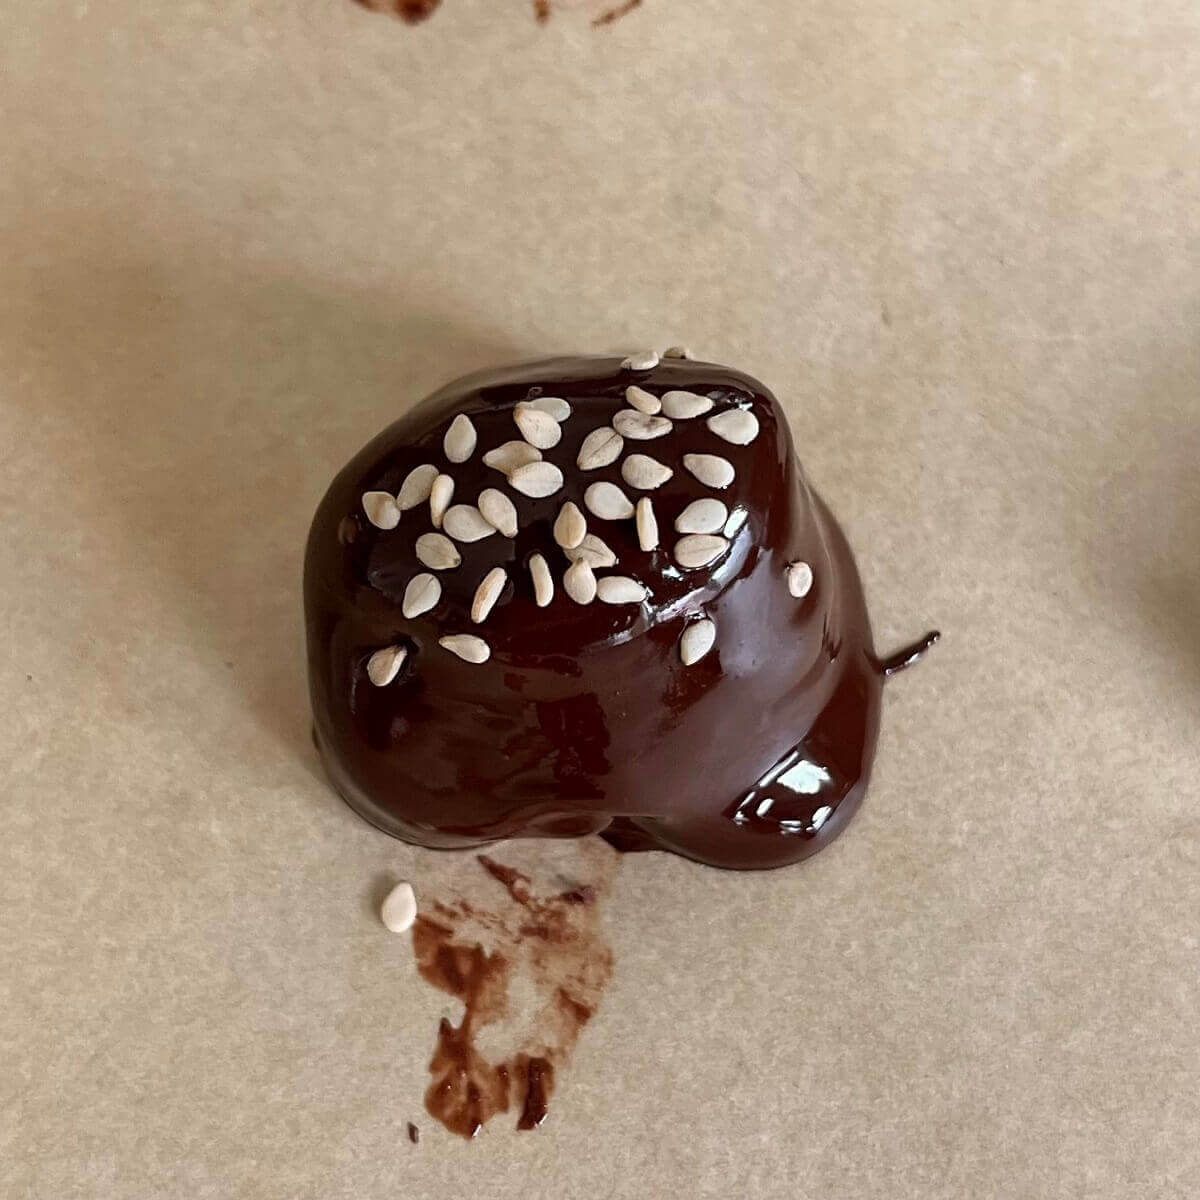 A chocolate dipped tahini ball sprinkled with sesame seeds on a sheet pan lined with parchment paper.